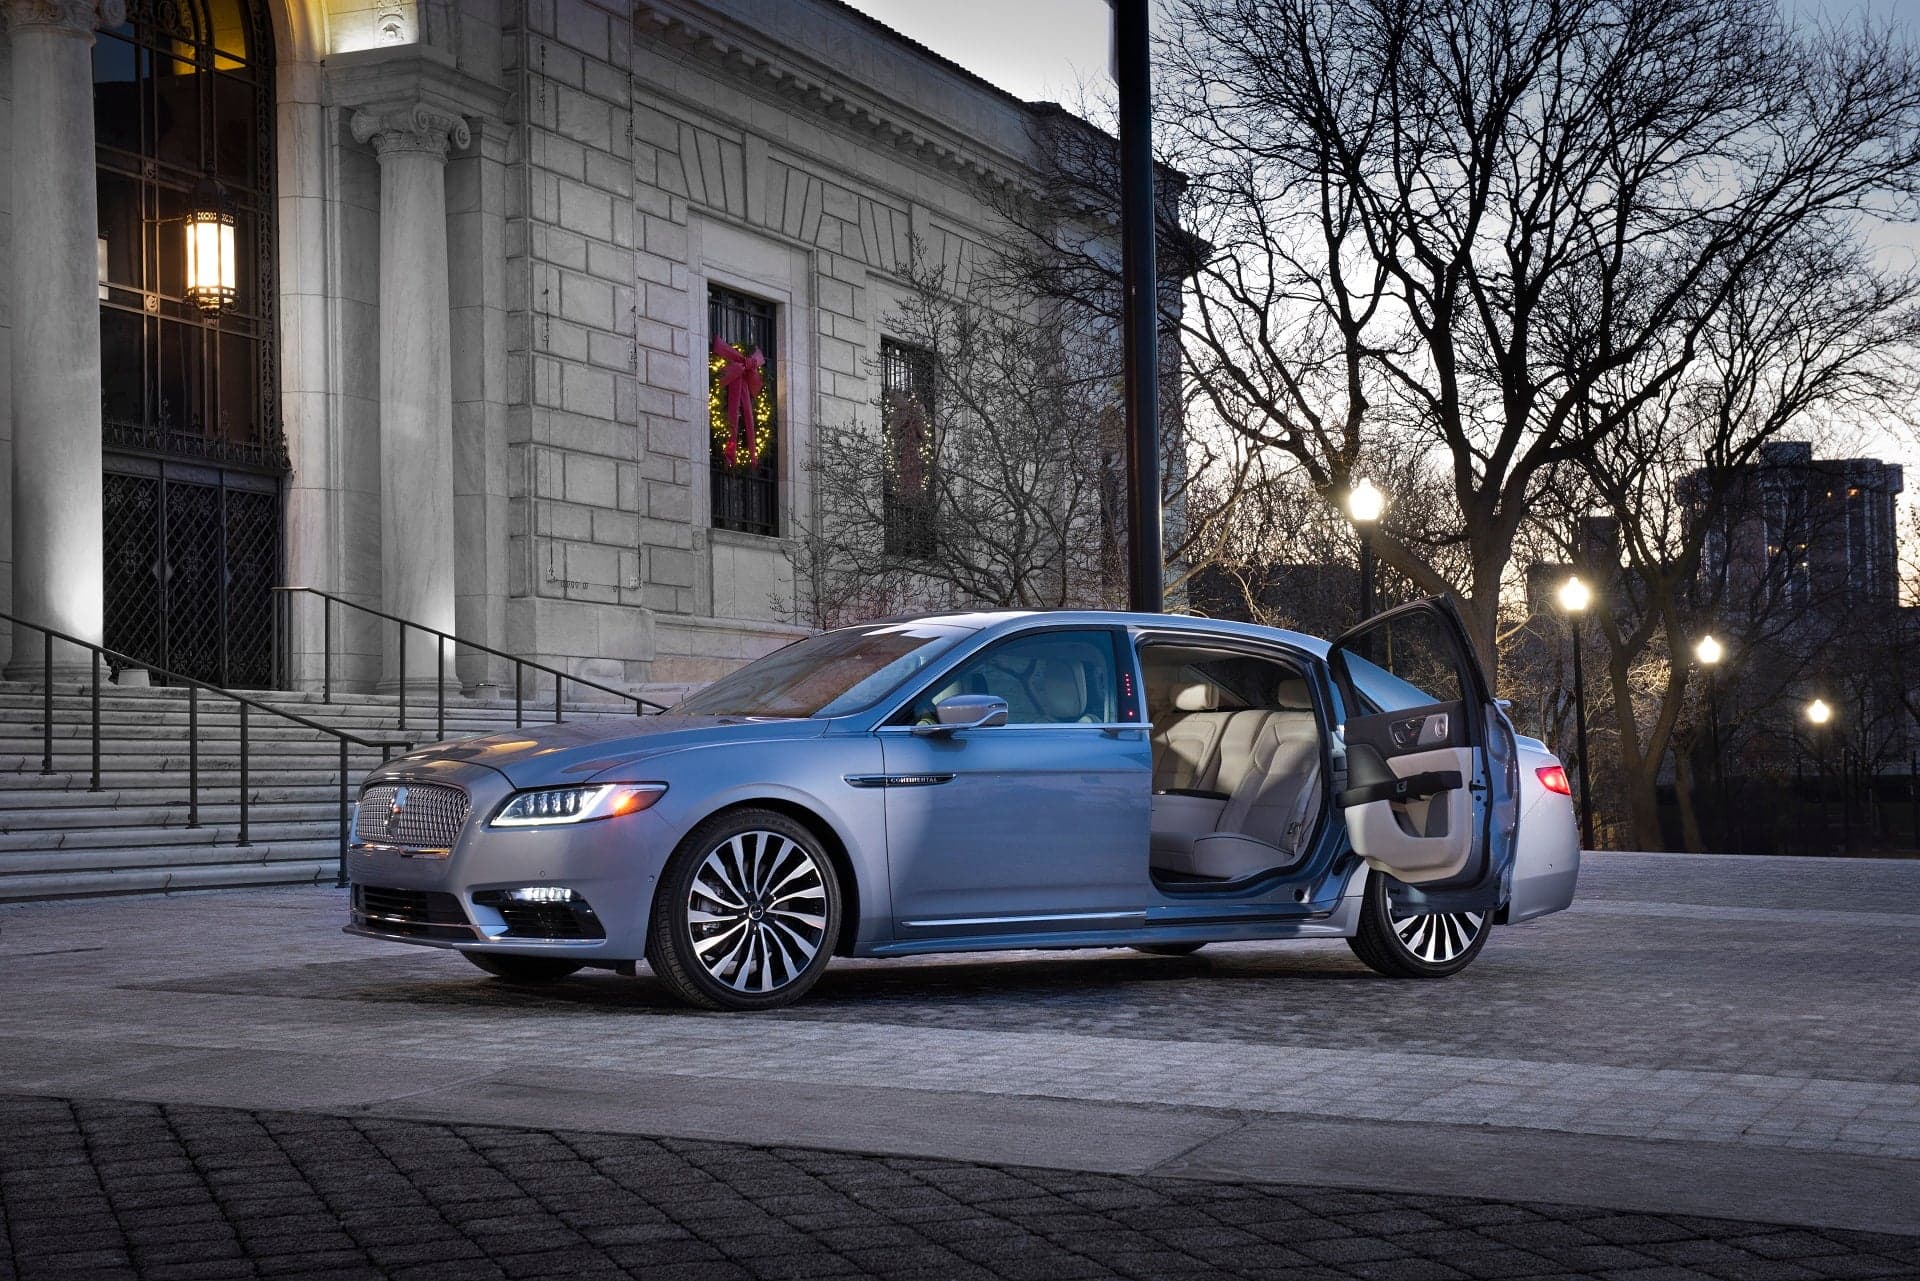 The $110,000 Lincoln Continental With ‘Suicide Doors’ Is Already Sold Out